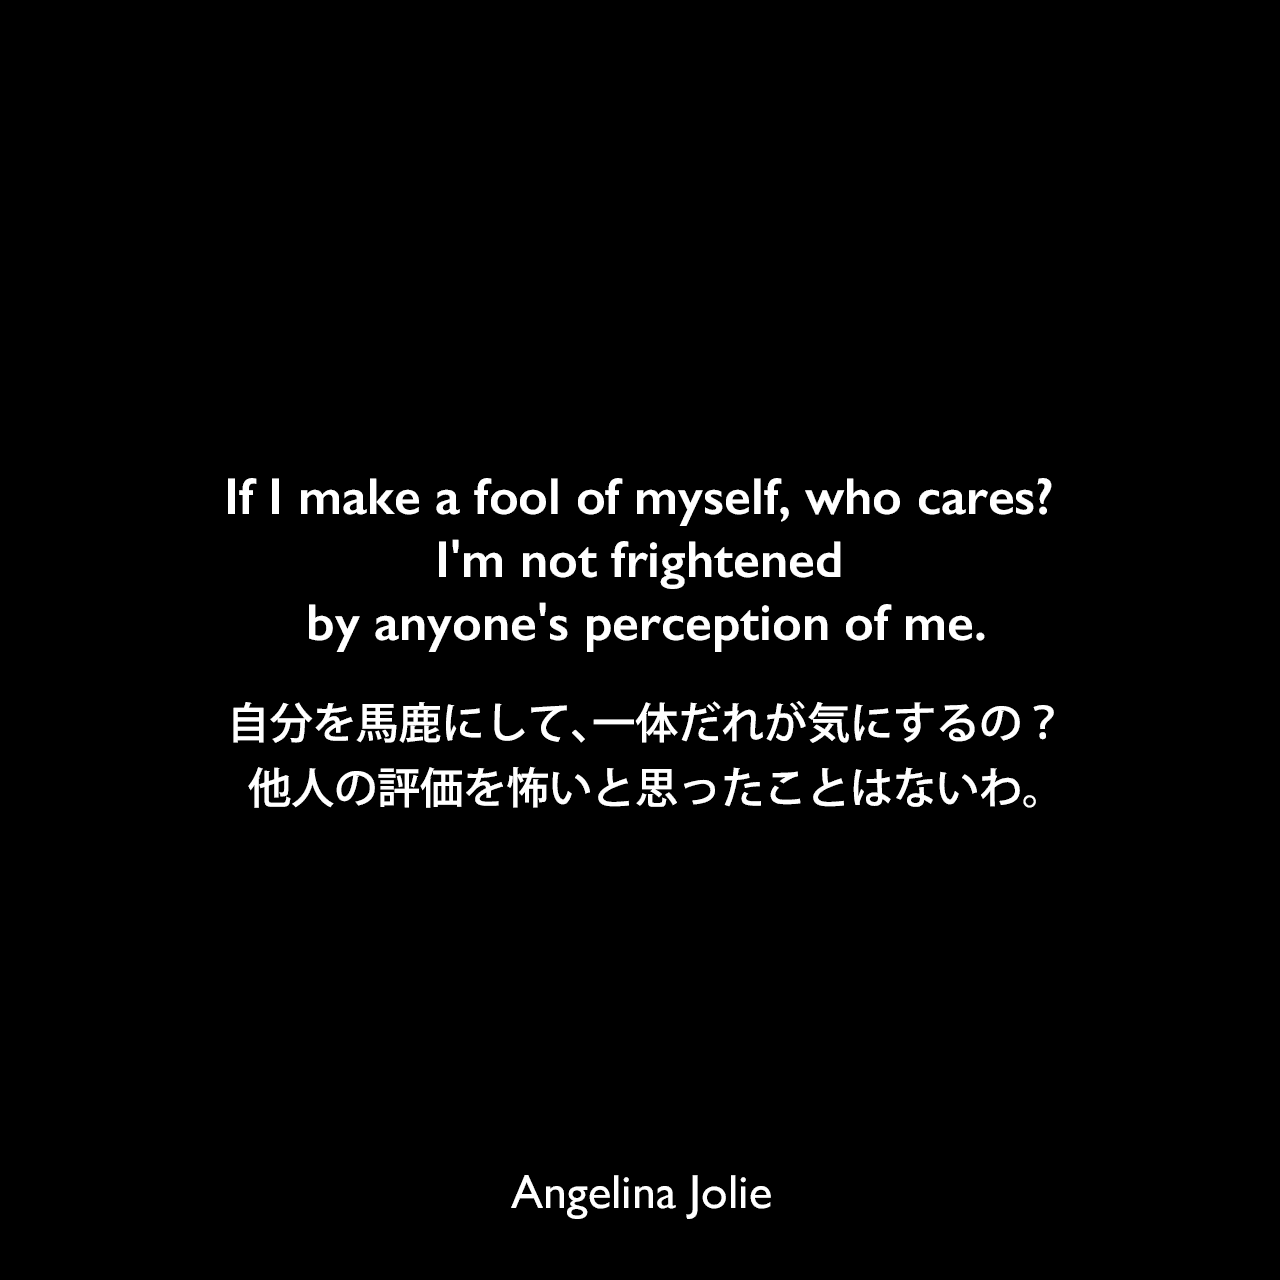 If I make a fool of myself, who cares? I'm not frightened by anyone's perception of me.自分を馬鹿にして、一体だれが気にするの？他人の評価を怖いと思ったことはないわ。Angelina Jolie